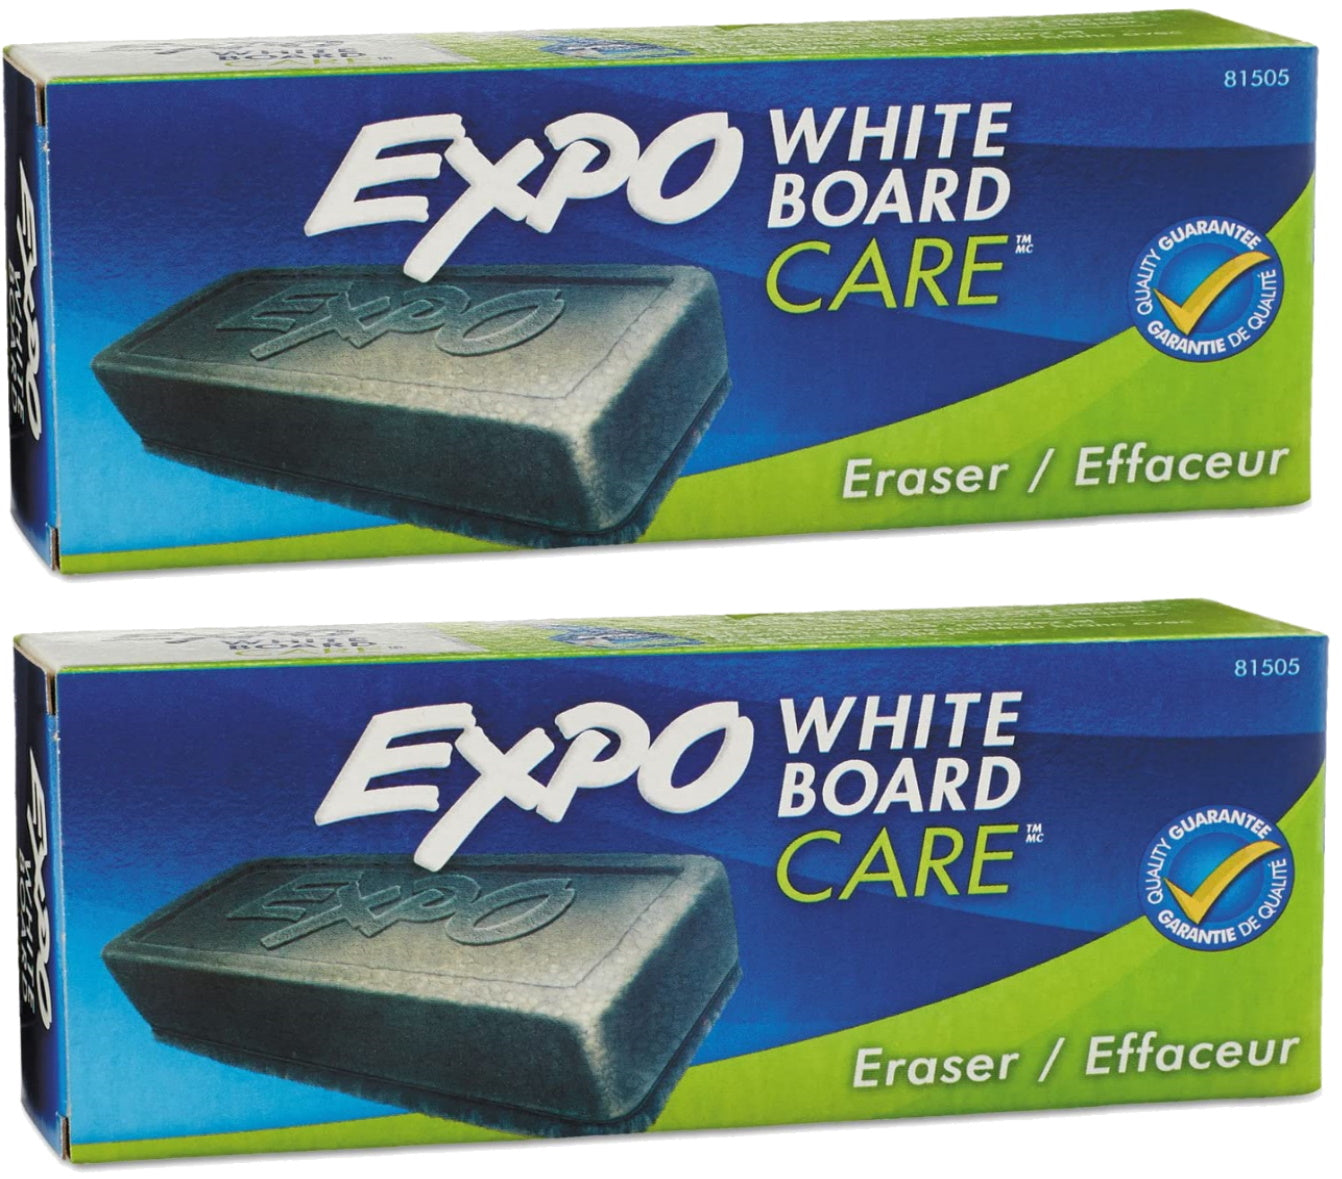 2 pcs Expo Dry Mark Eraser Block Whiteboard Board Eraser, Soft Pile 5 1/8 W x 1 1/4 H inches